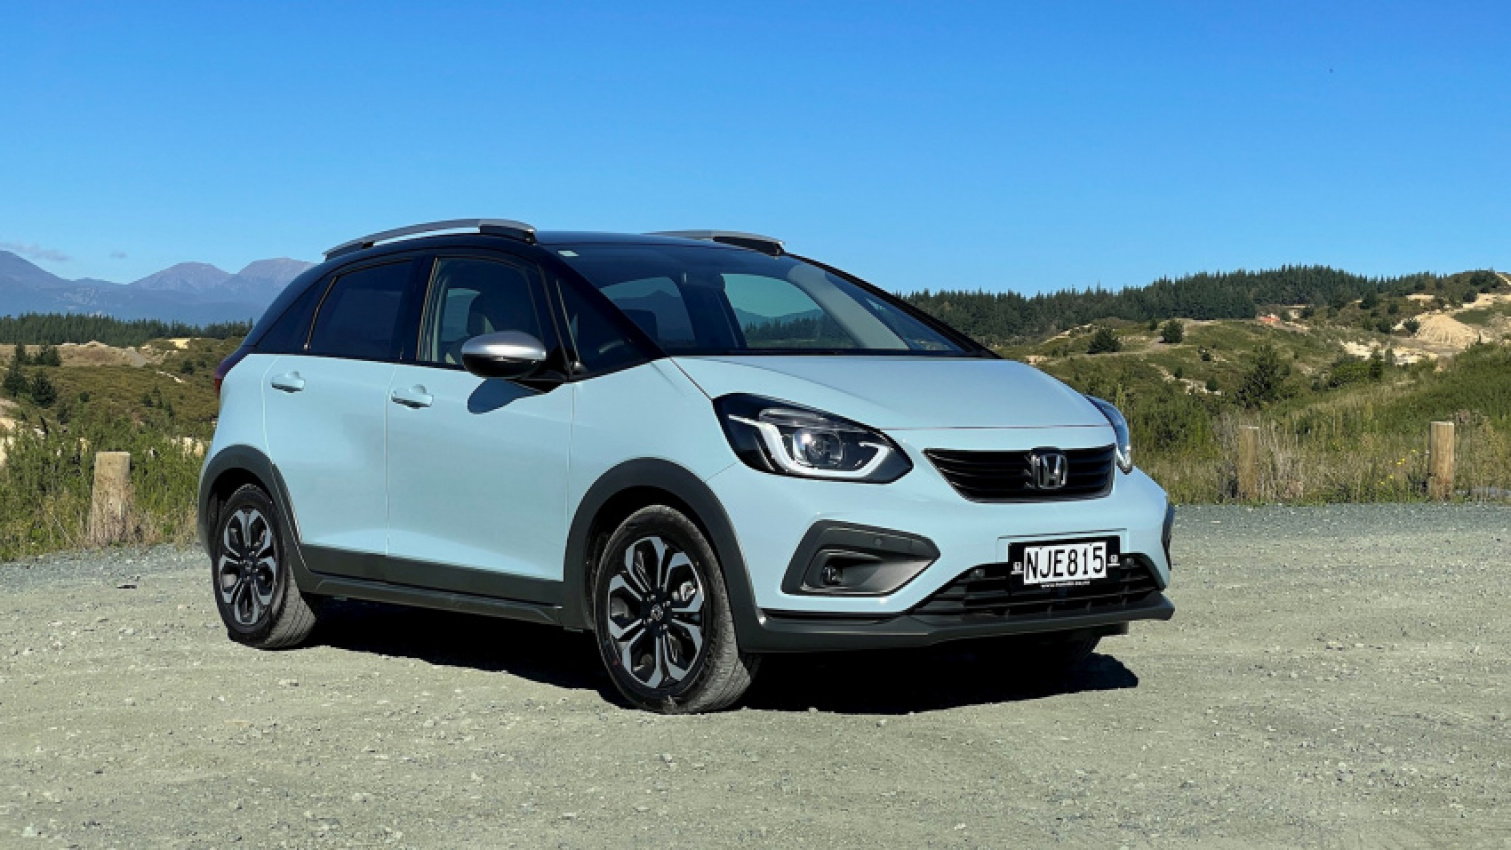 autos, cars, advice, automotive industry, buying & selling tips, car, car advice, car buyers&039; guide, cars, driven, driven nz, hatchback, honda, mazda, motoring, national, new used, new zealand, news, nz, toyota, volkswagen, aa buyer's guide: hatchbacks that feel like they could last forever, new and used